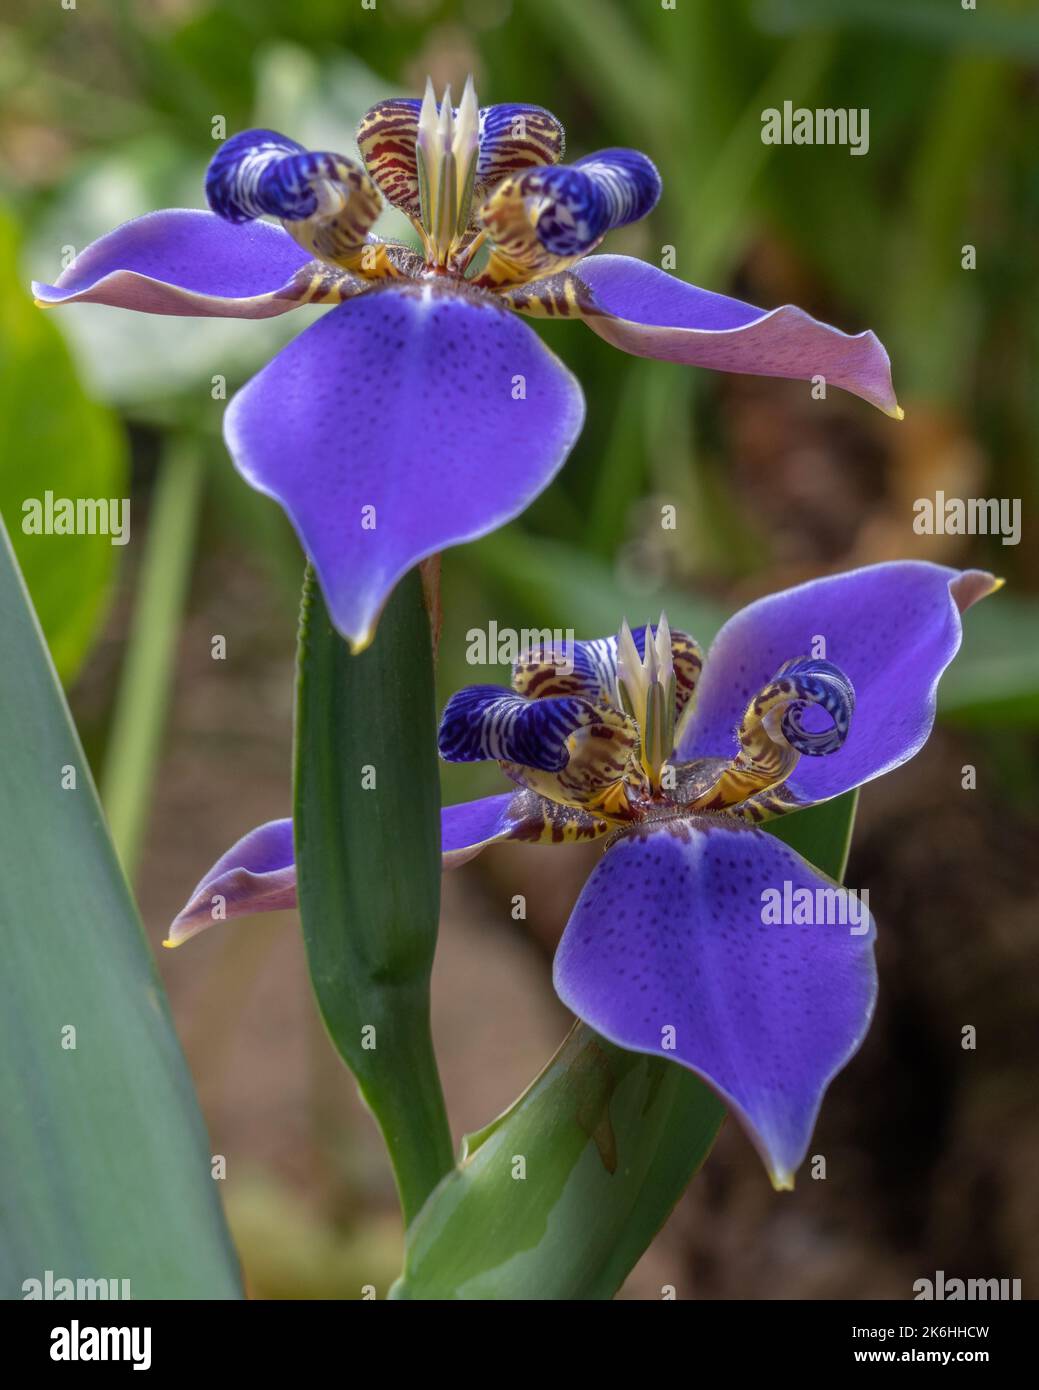 Closeup of beautiful bright blue walking iris neomarica caerulea flowers blooming outdoors in garden with natural background Stock Photo